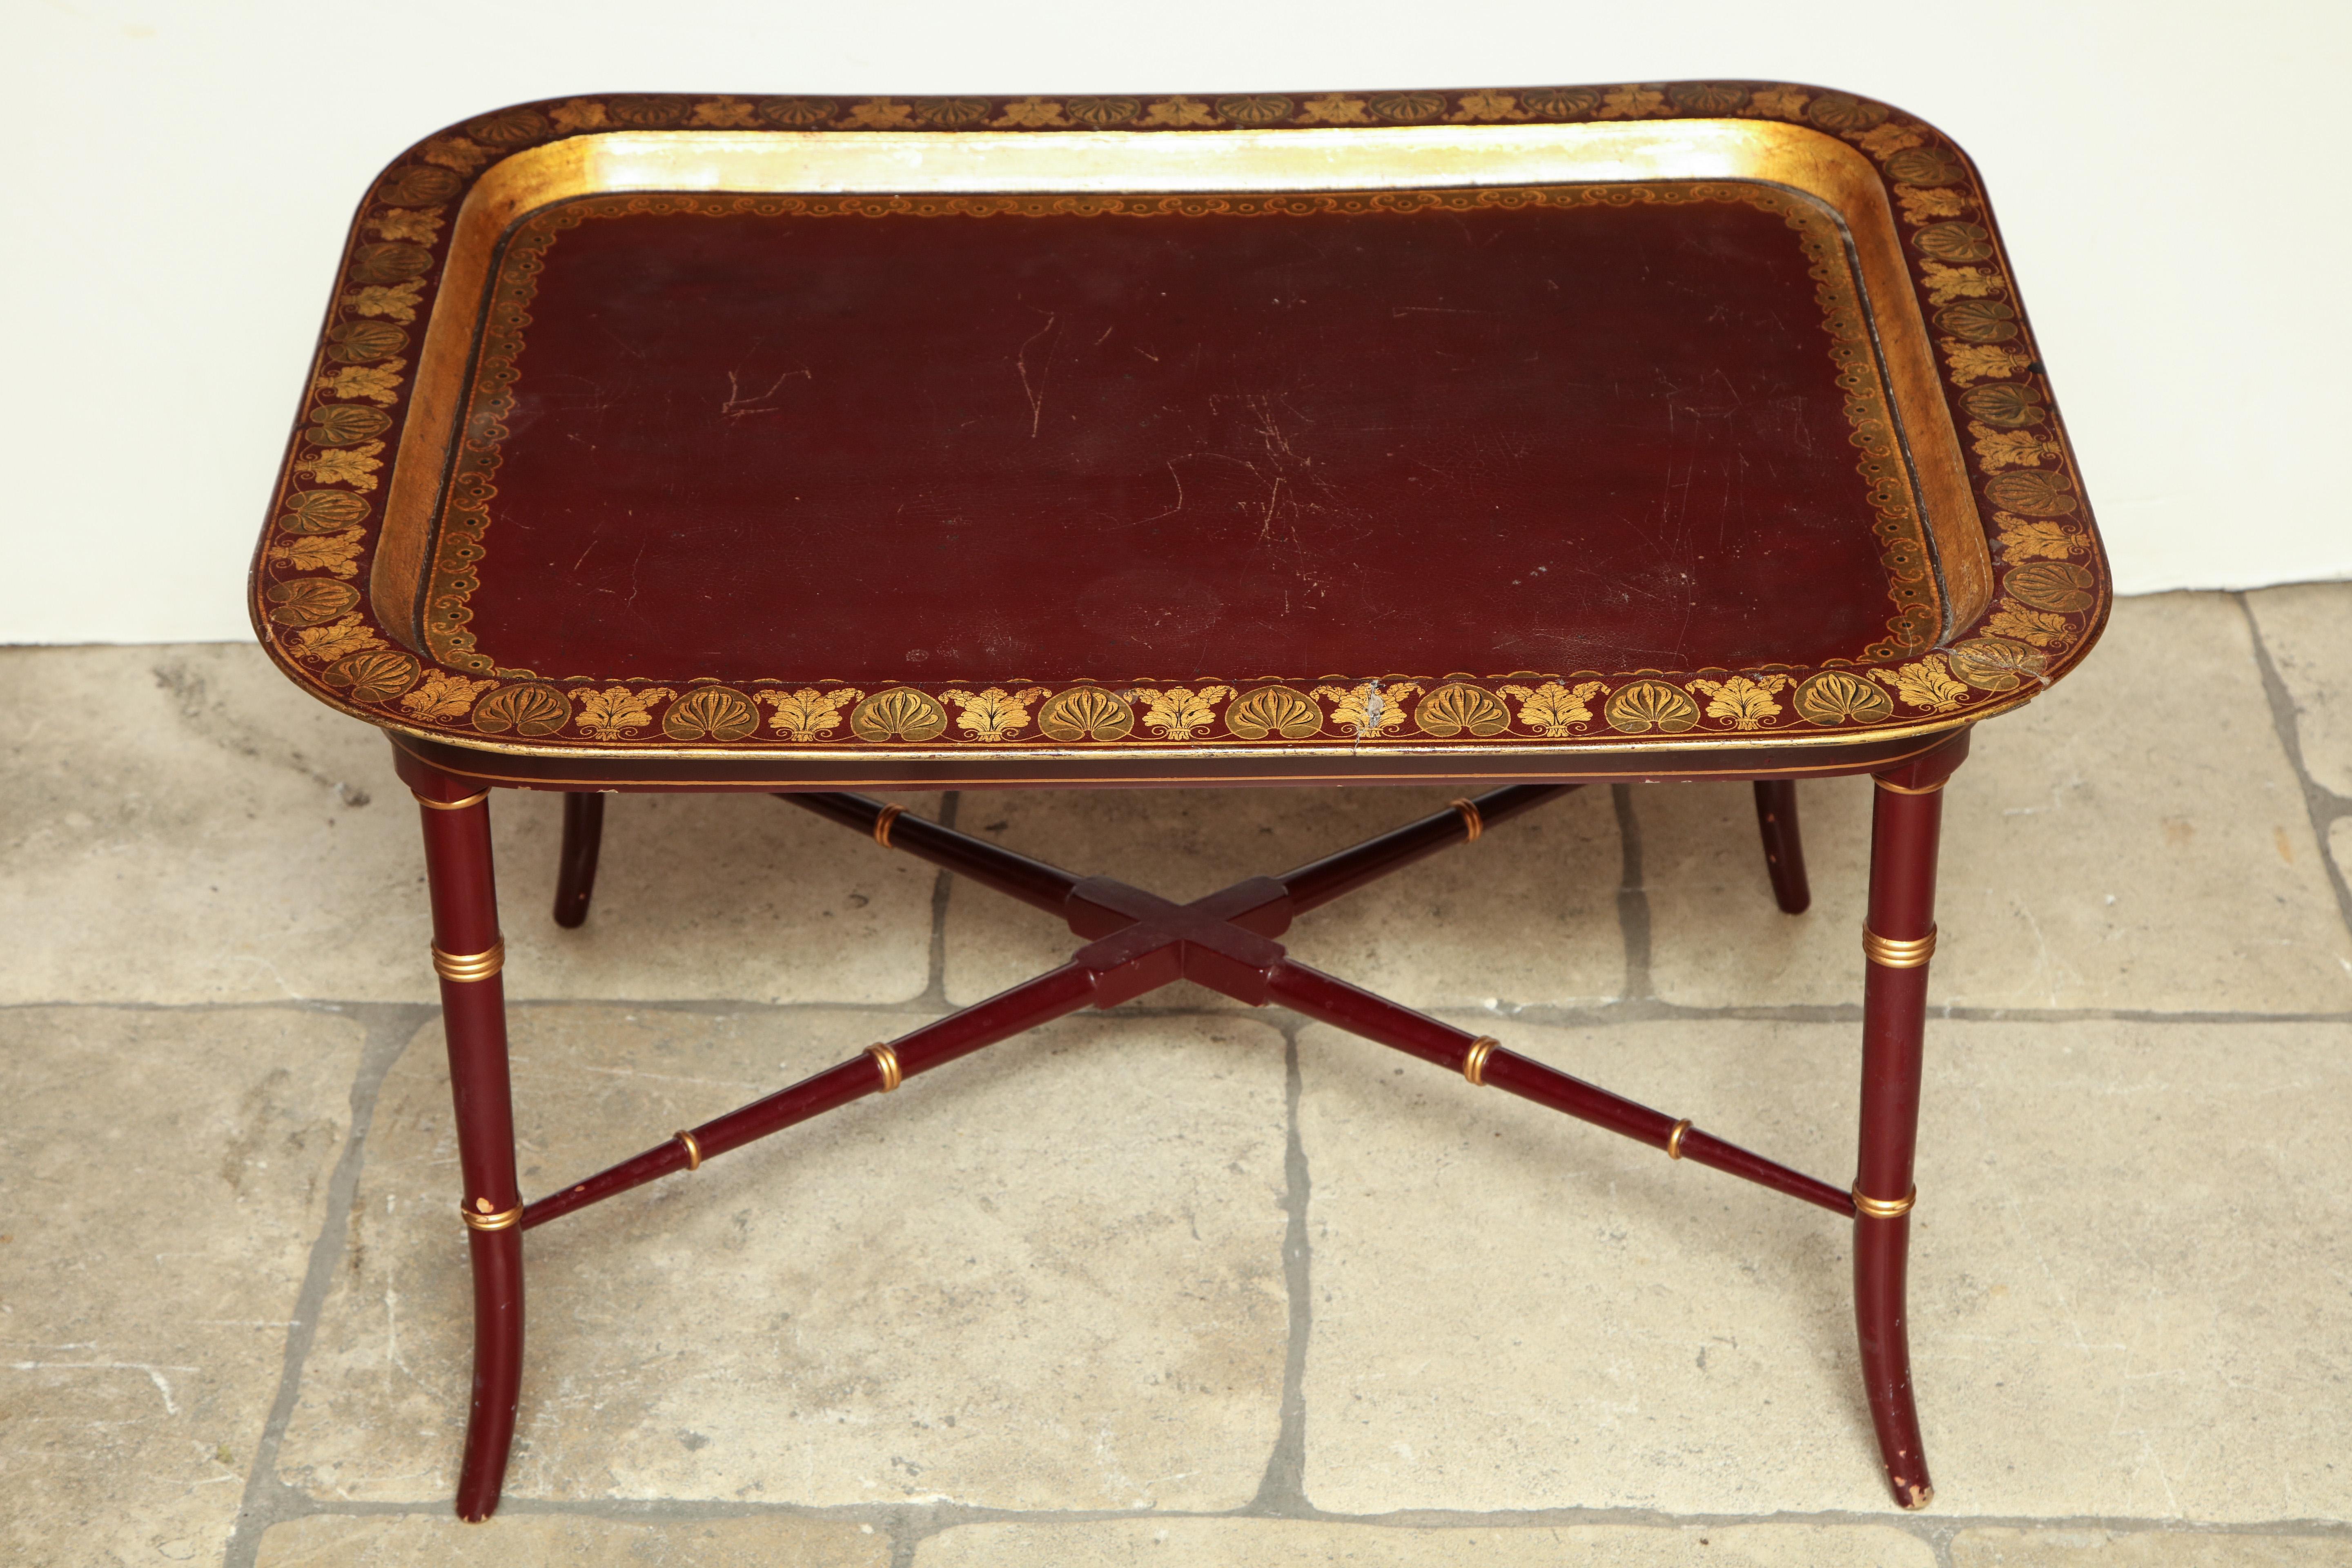 High Victorian English Red Lacquered Papier Mâché Tray Table